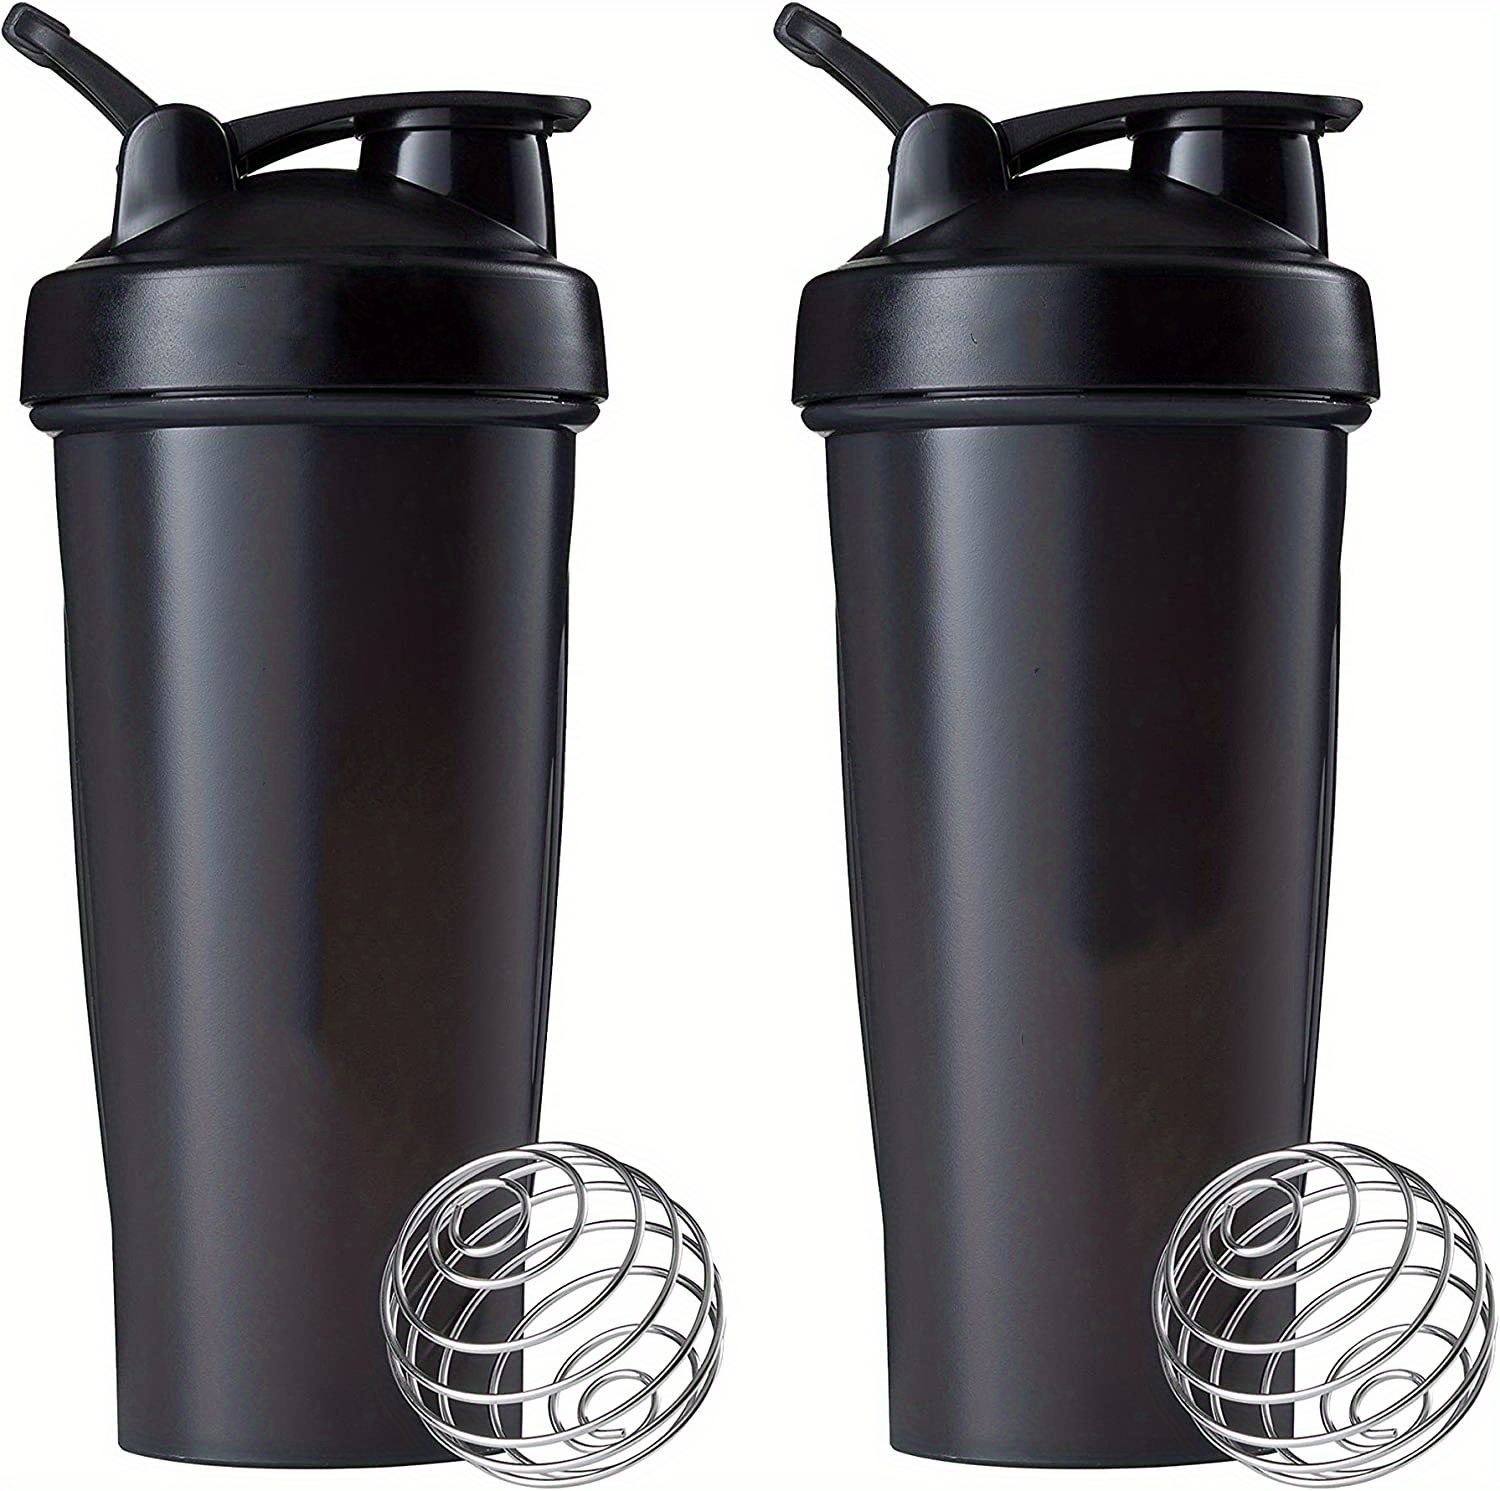 VECH Shaker Bottles for Protein Mixes Workout Shaker Leak Proof